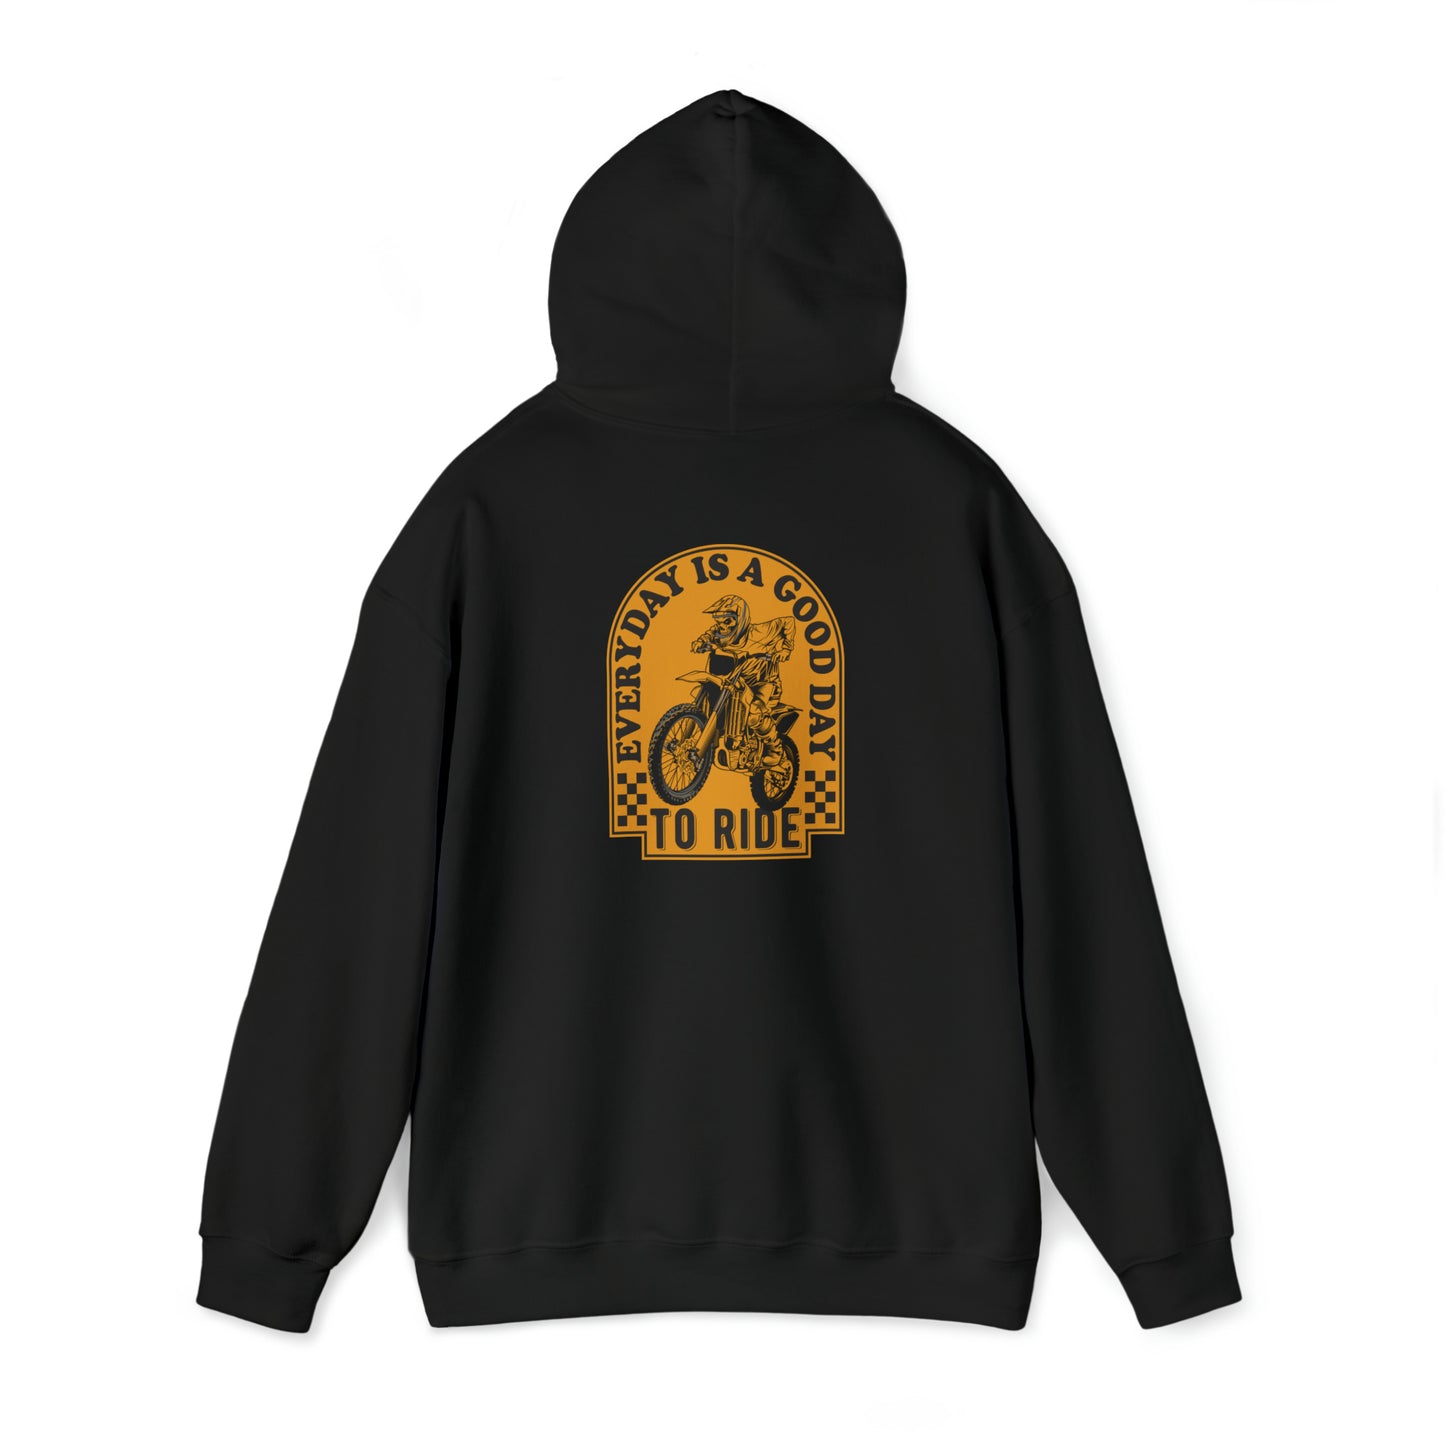 Every Day Is a Good Day Hooded Sweatshirt - MotoPros 